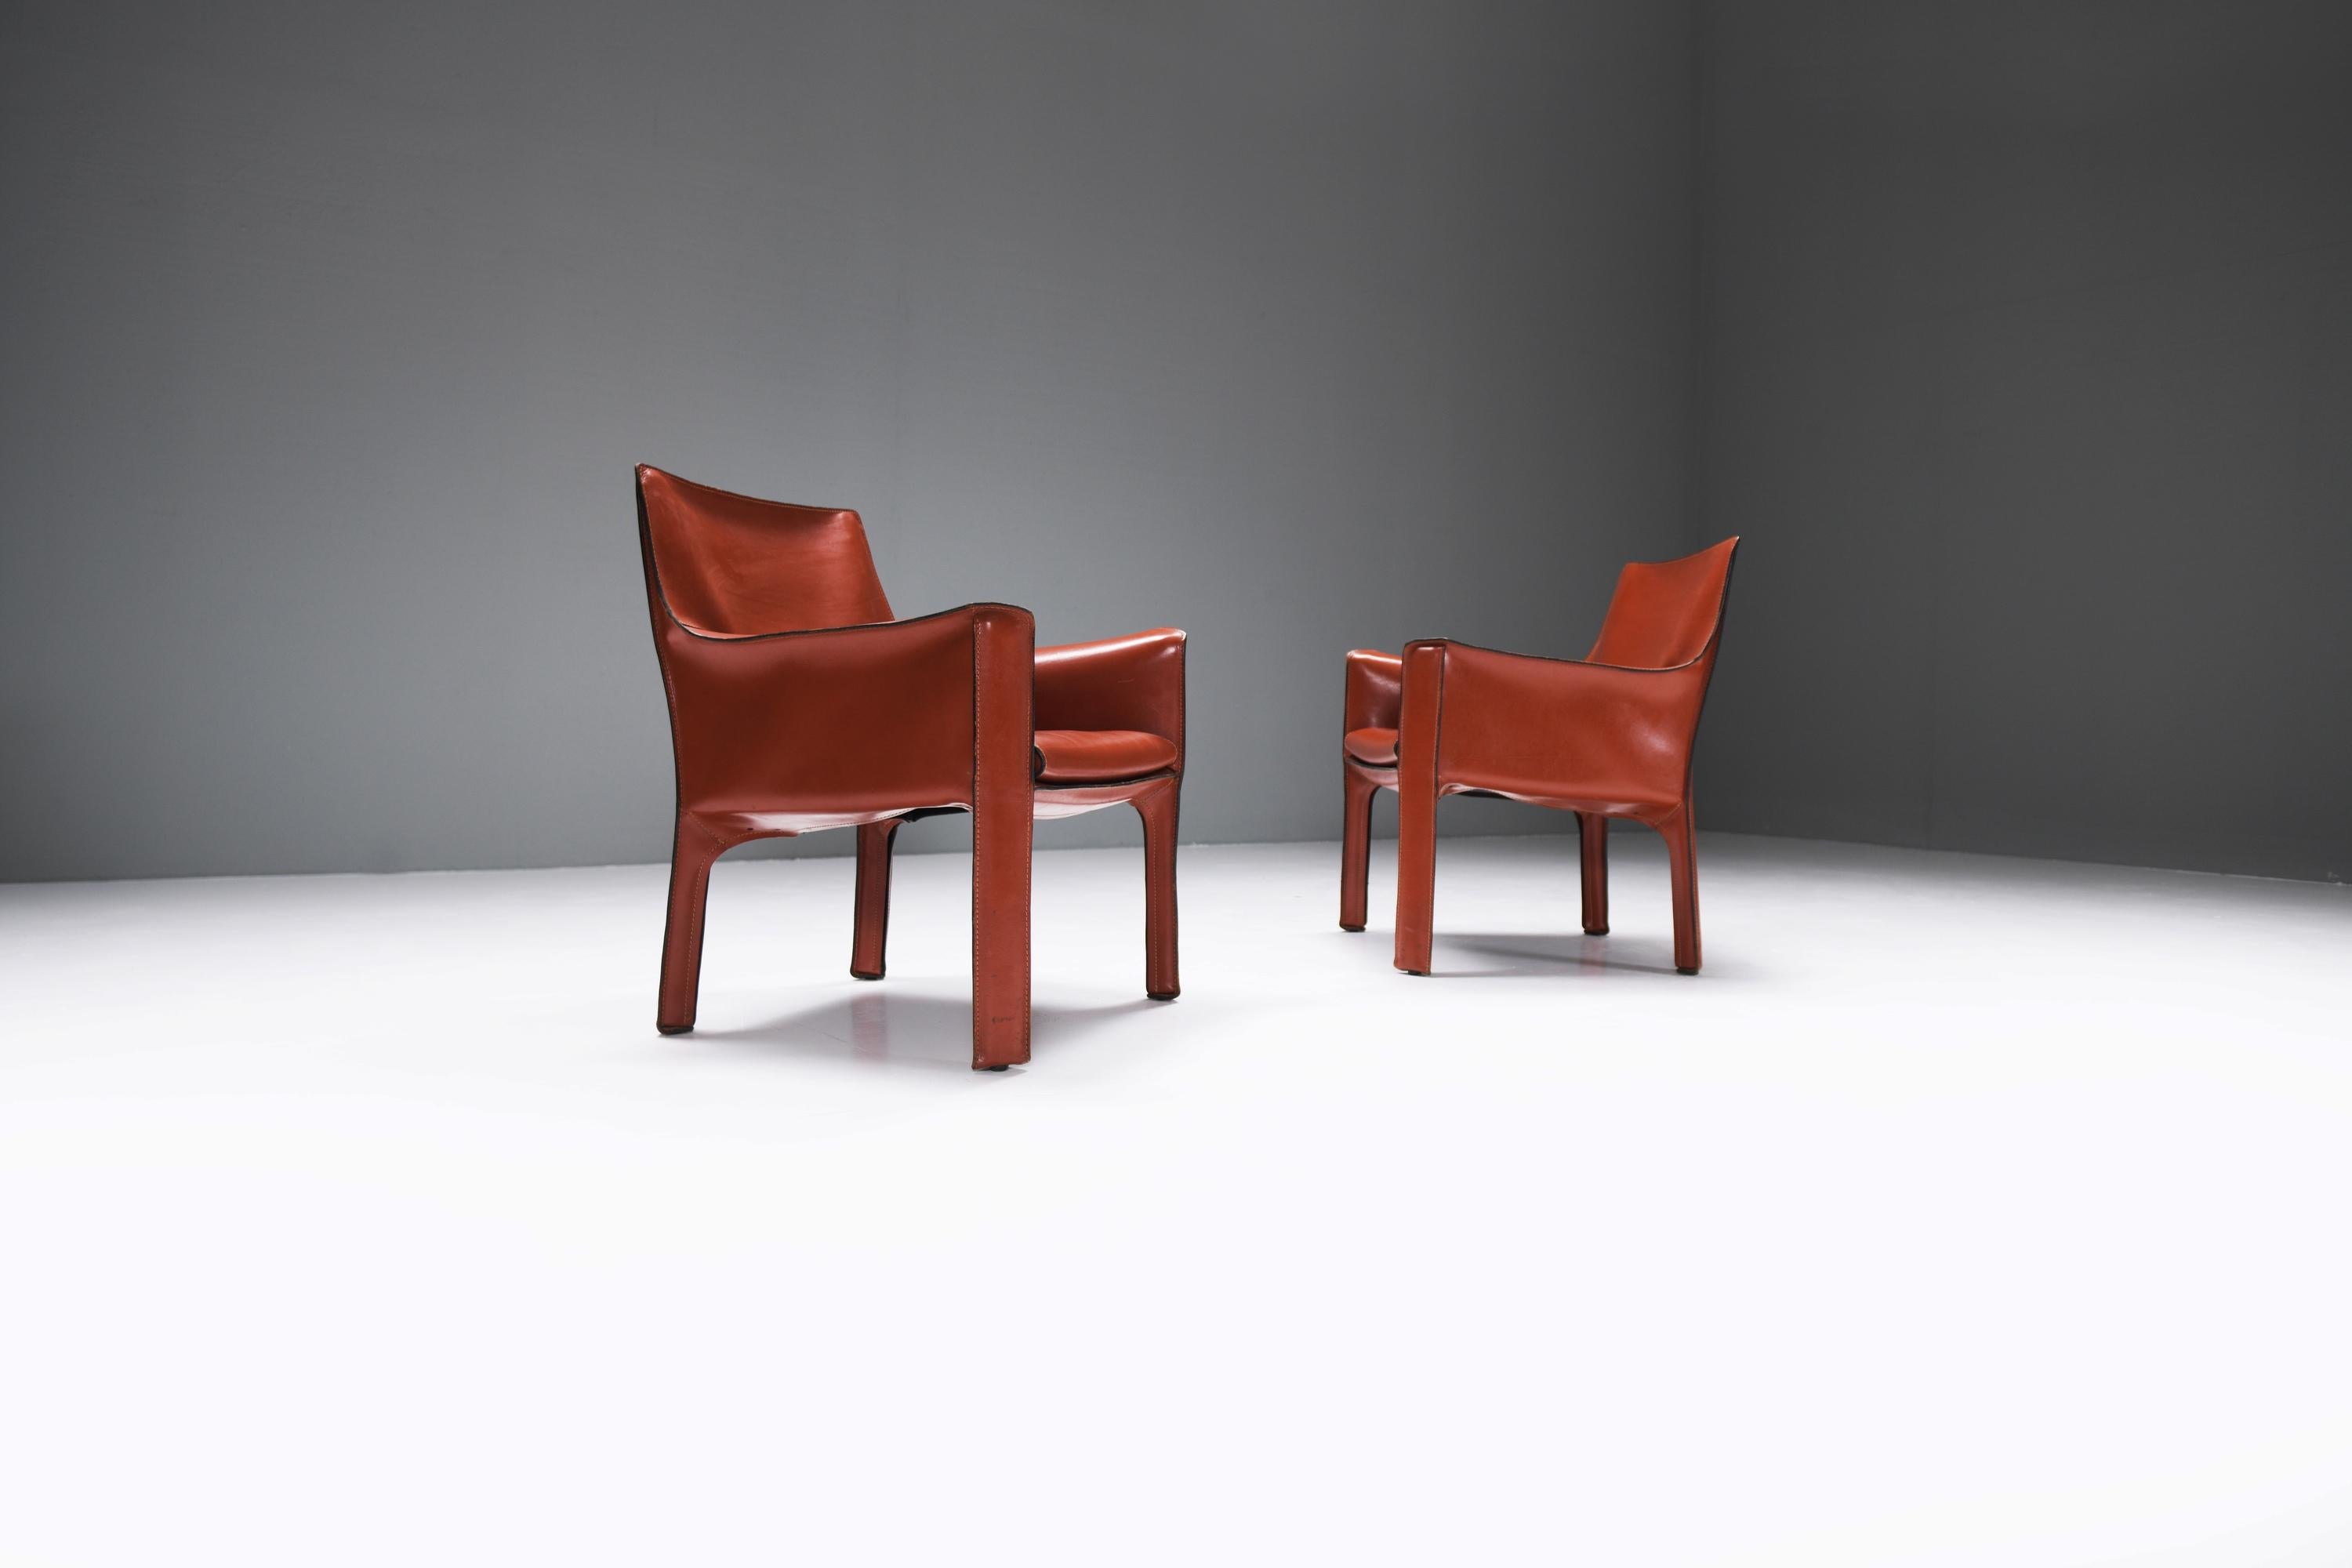 Matching CAB 414 dining chairs in a beautiful burgundy vintage leather. These chairs are no longer produced by Cassina.Designed by Mario Bellini for CASSINA.

These beautiful 414 leather cab chair designed by architect and designer Mario Bellini for